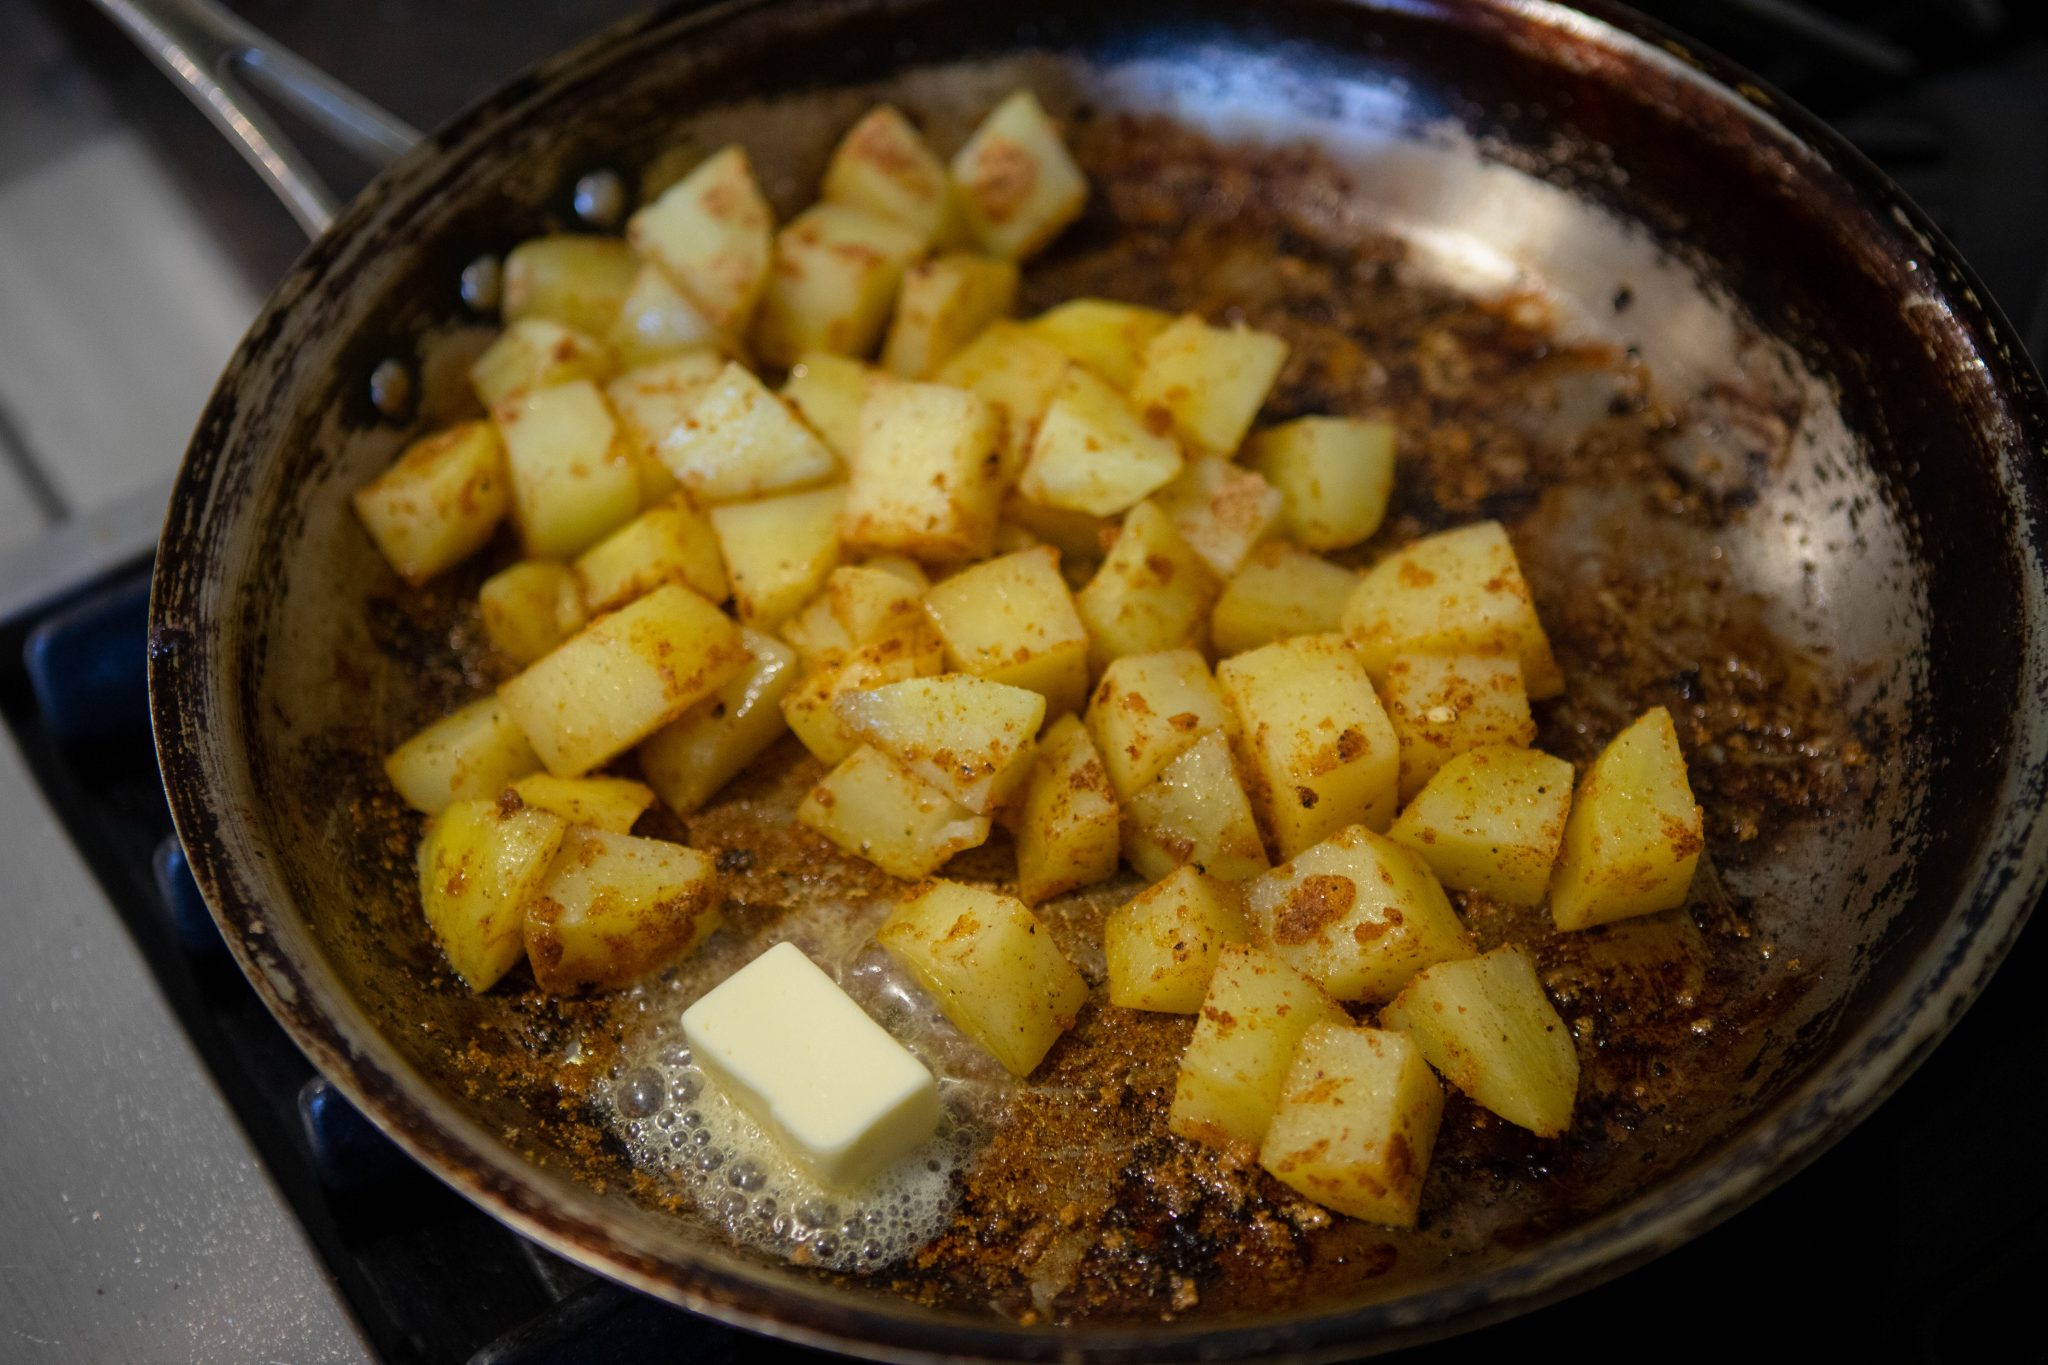 cubed potatoes and butter cooking in a large saute pan